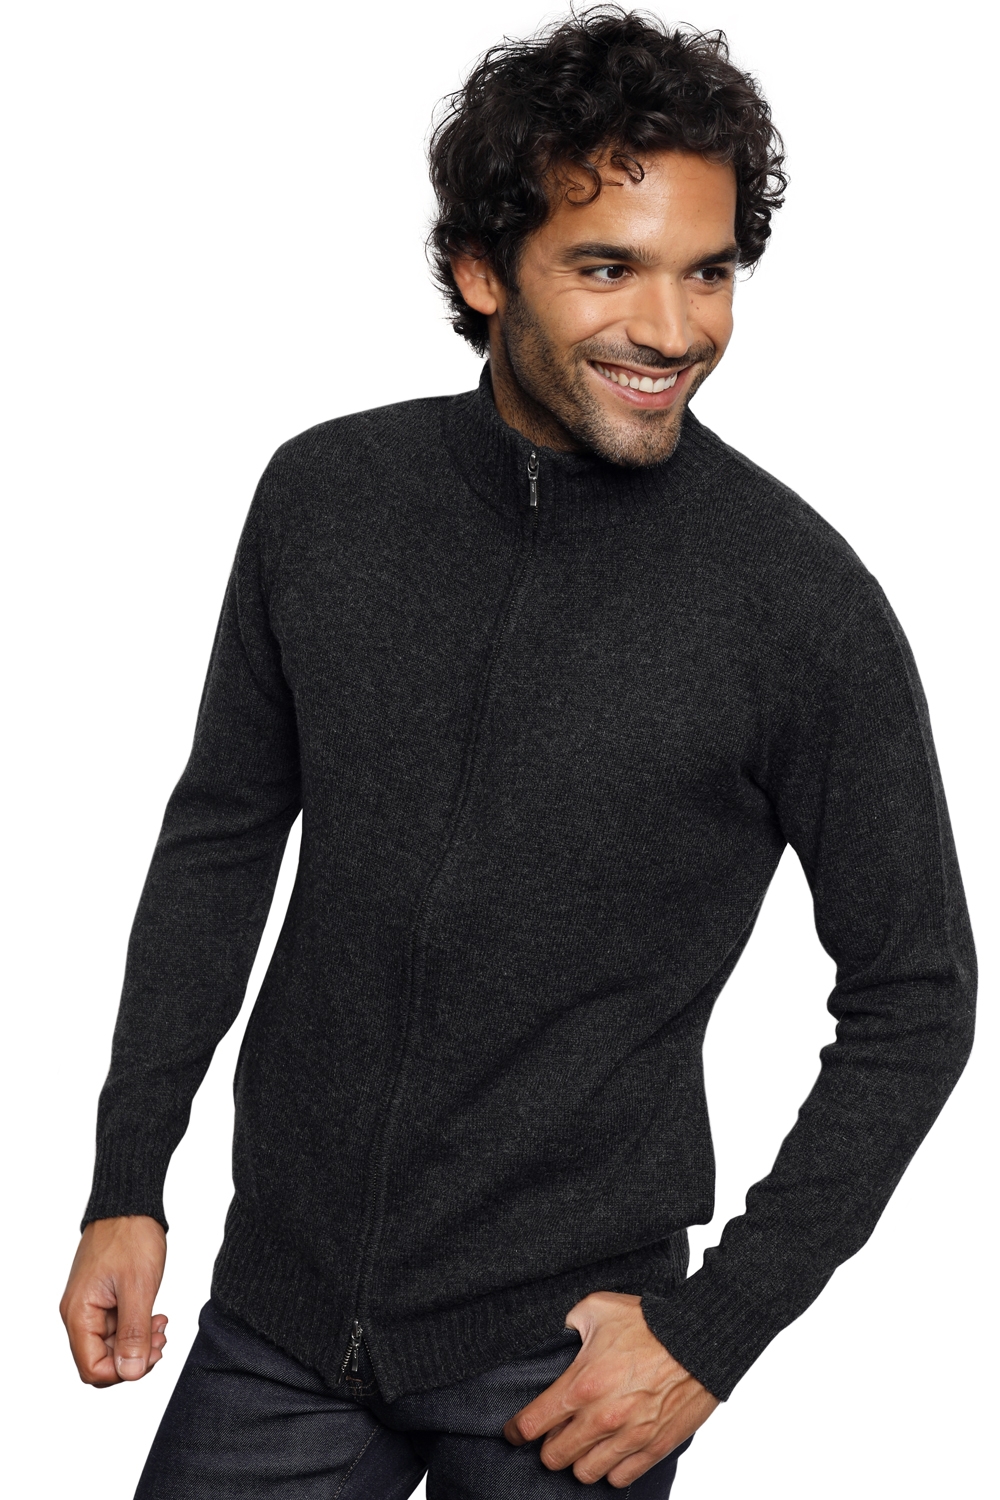 Chameau pull homme clyde anthracite 3xl